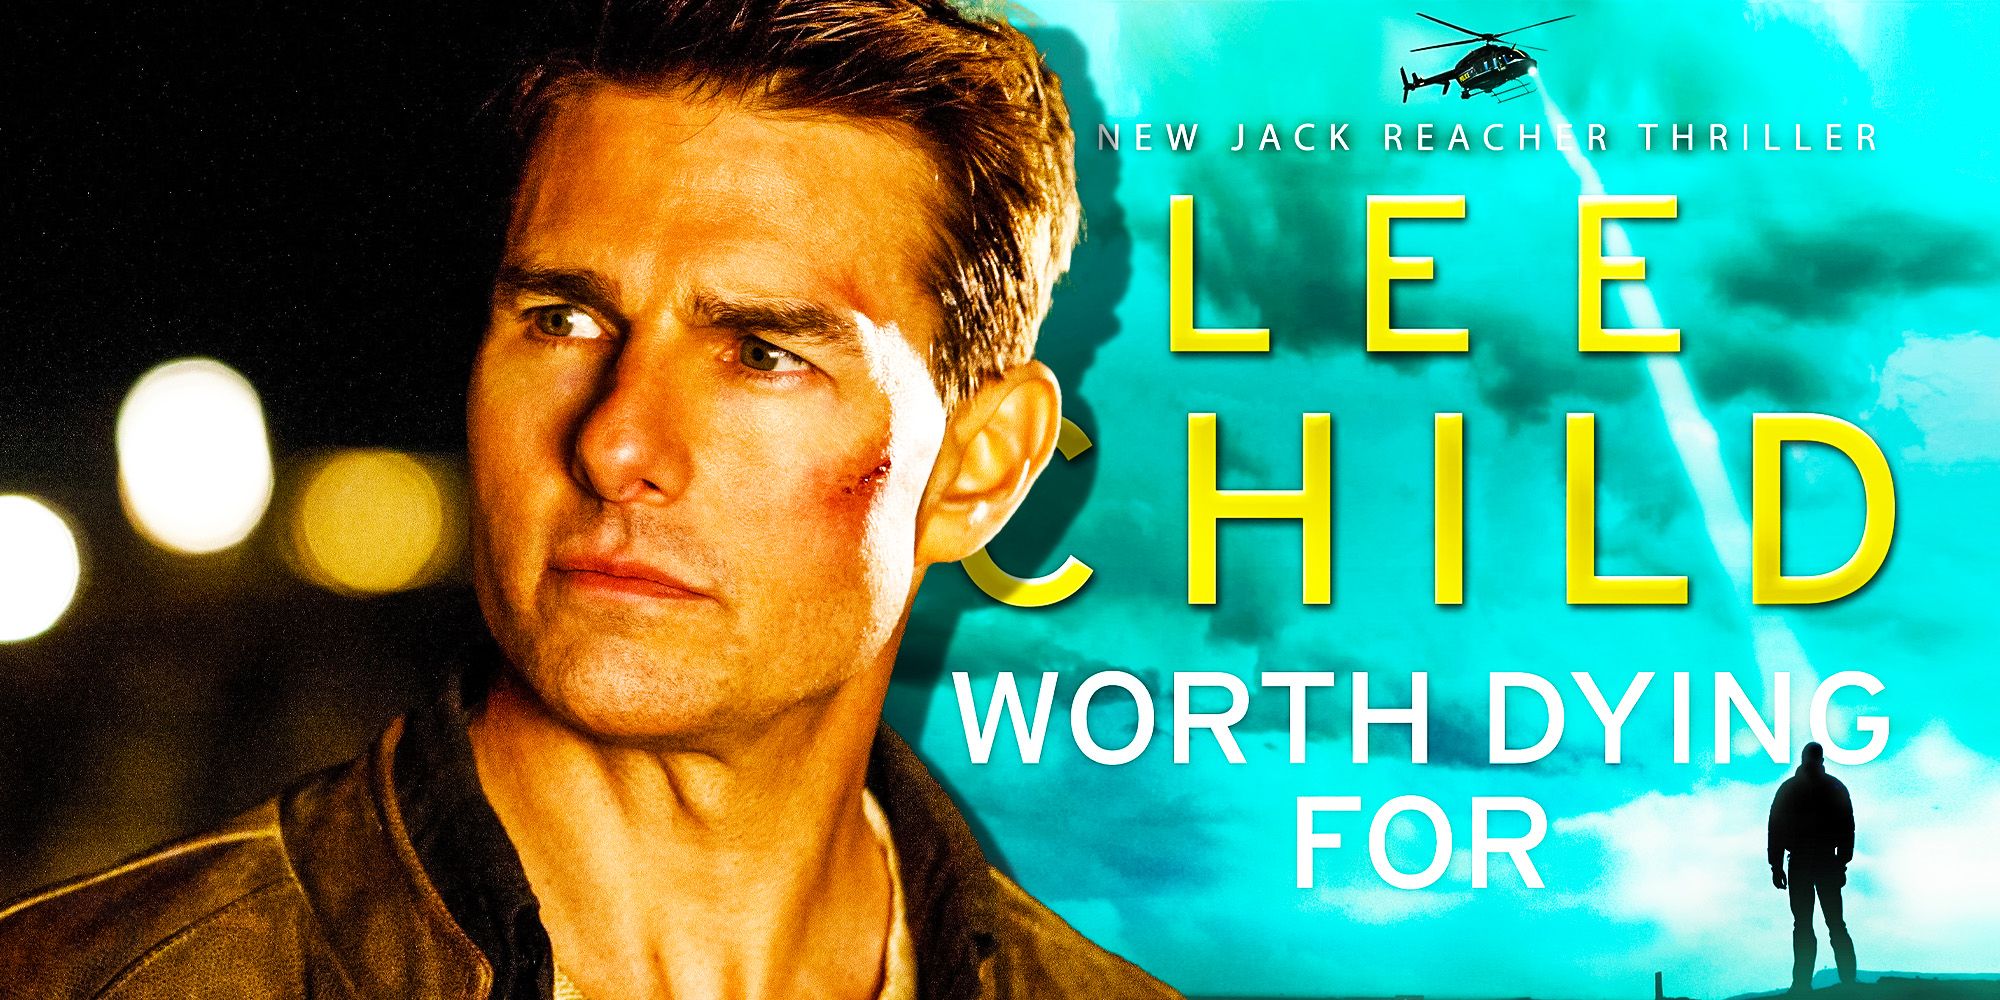 Tom Cruise as Jack Reacher with Lee Child's Worth Dying For book cover